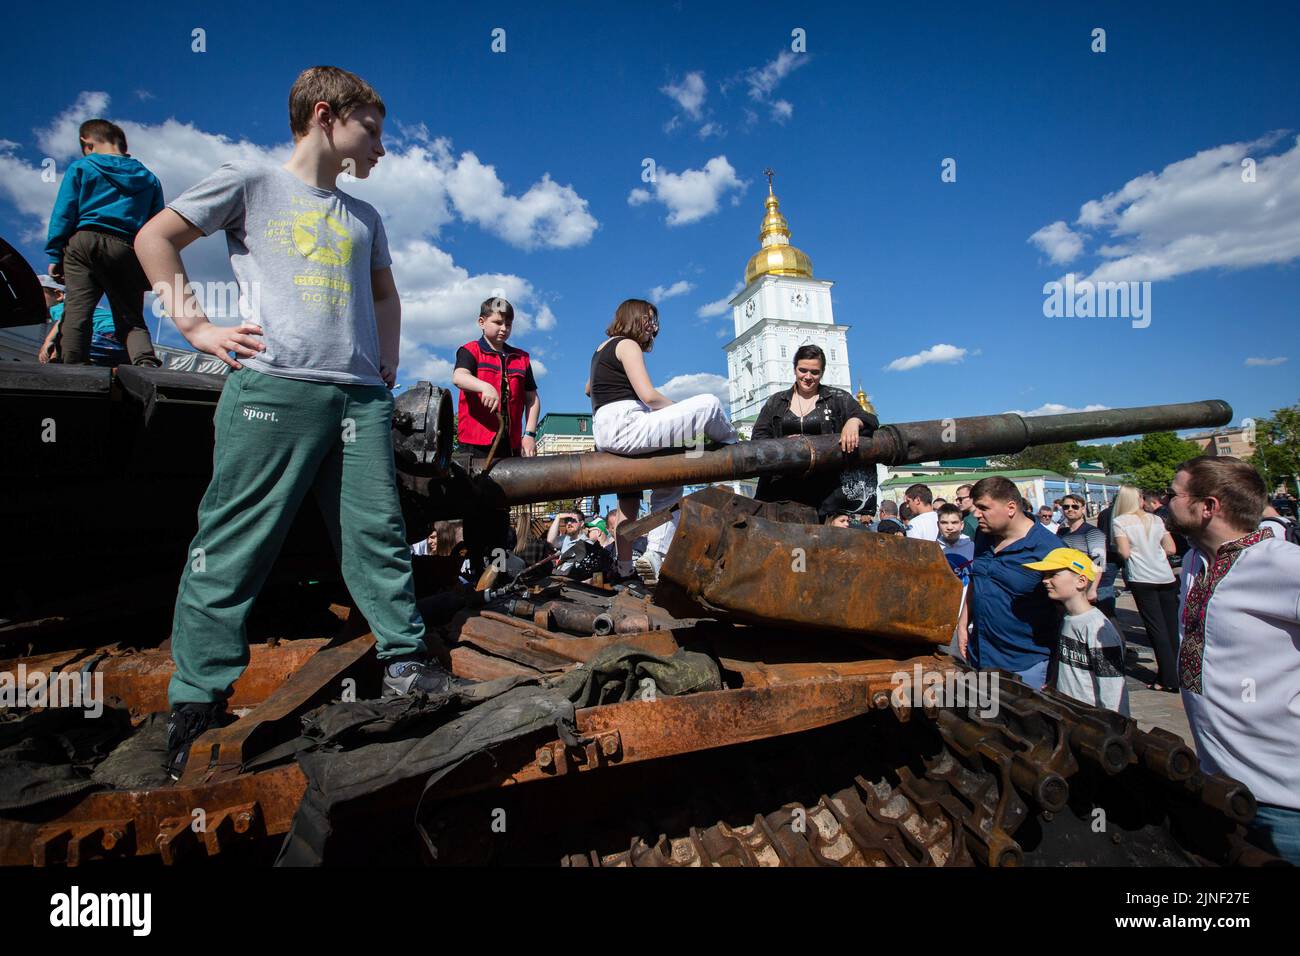 Children play on a destroyed Russian tank during an exhibition showing Russian military hardware destroyed during Russia's invasion of Ukraine in central Kyiv. On February 24, 2022, Russian troops entered Ukrainian territory, starting a conflict that provoked destruction and a humanitarian crisis. Stock Photo